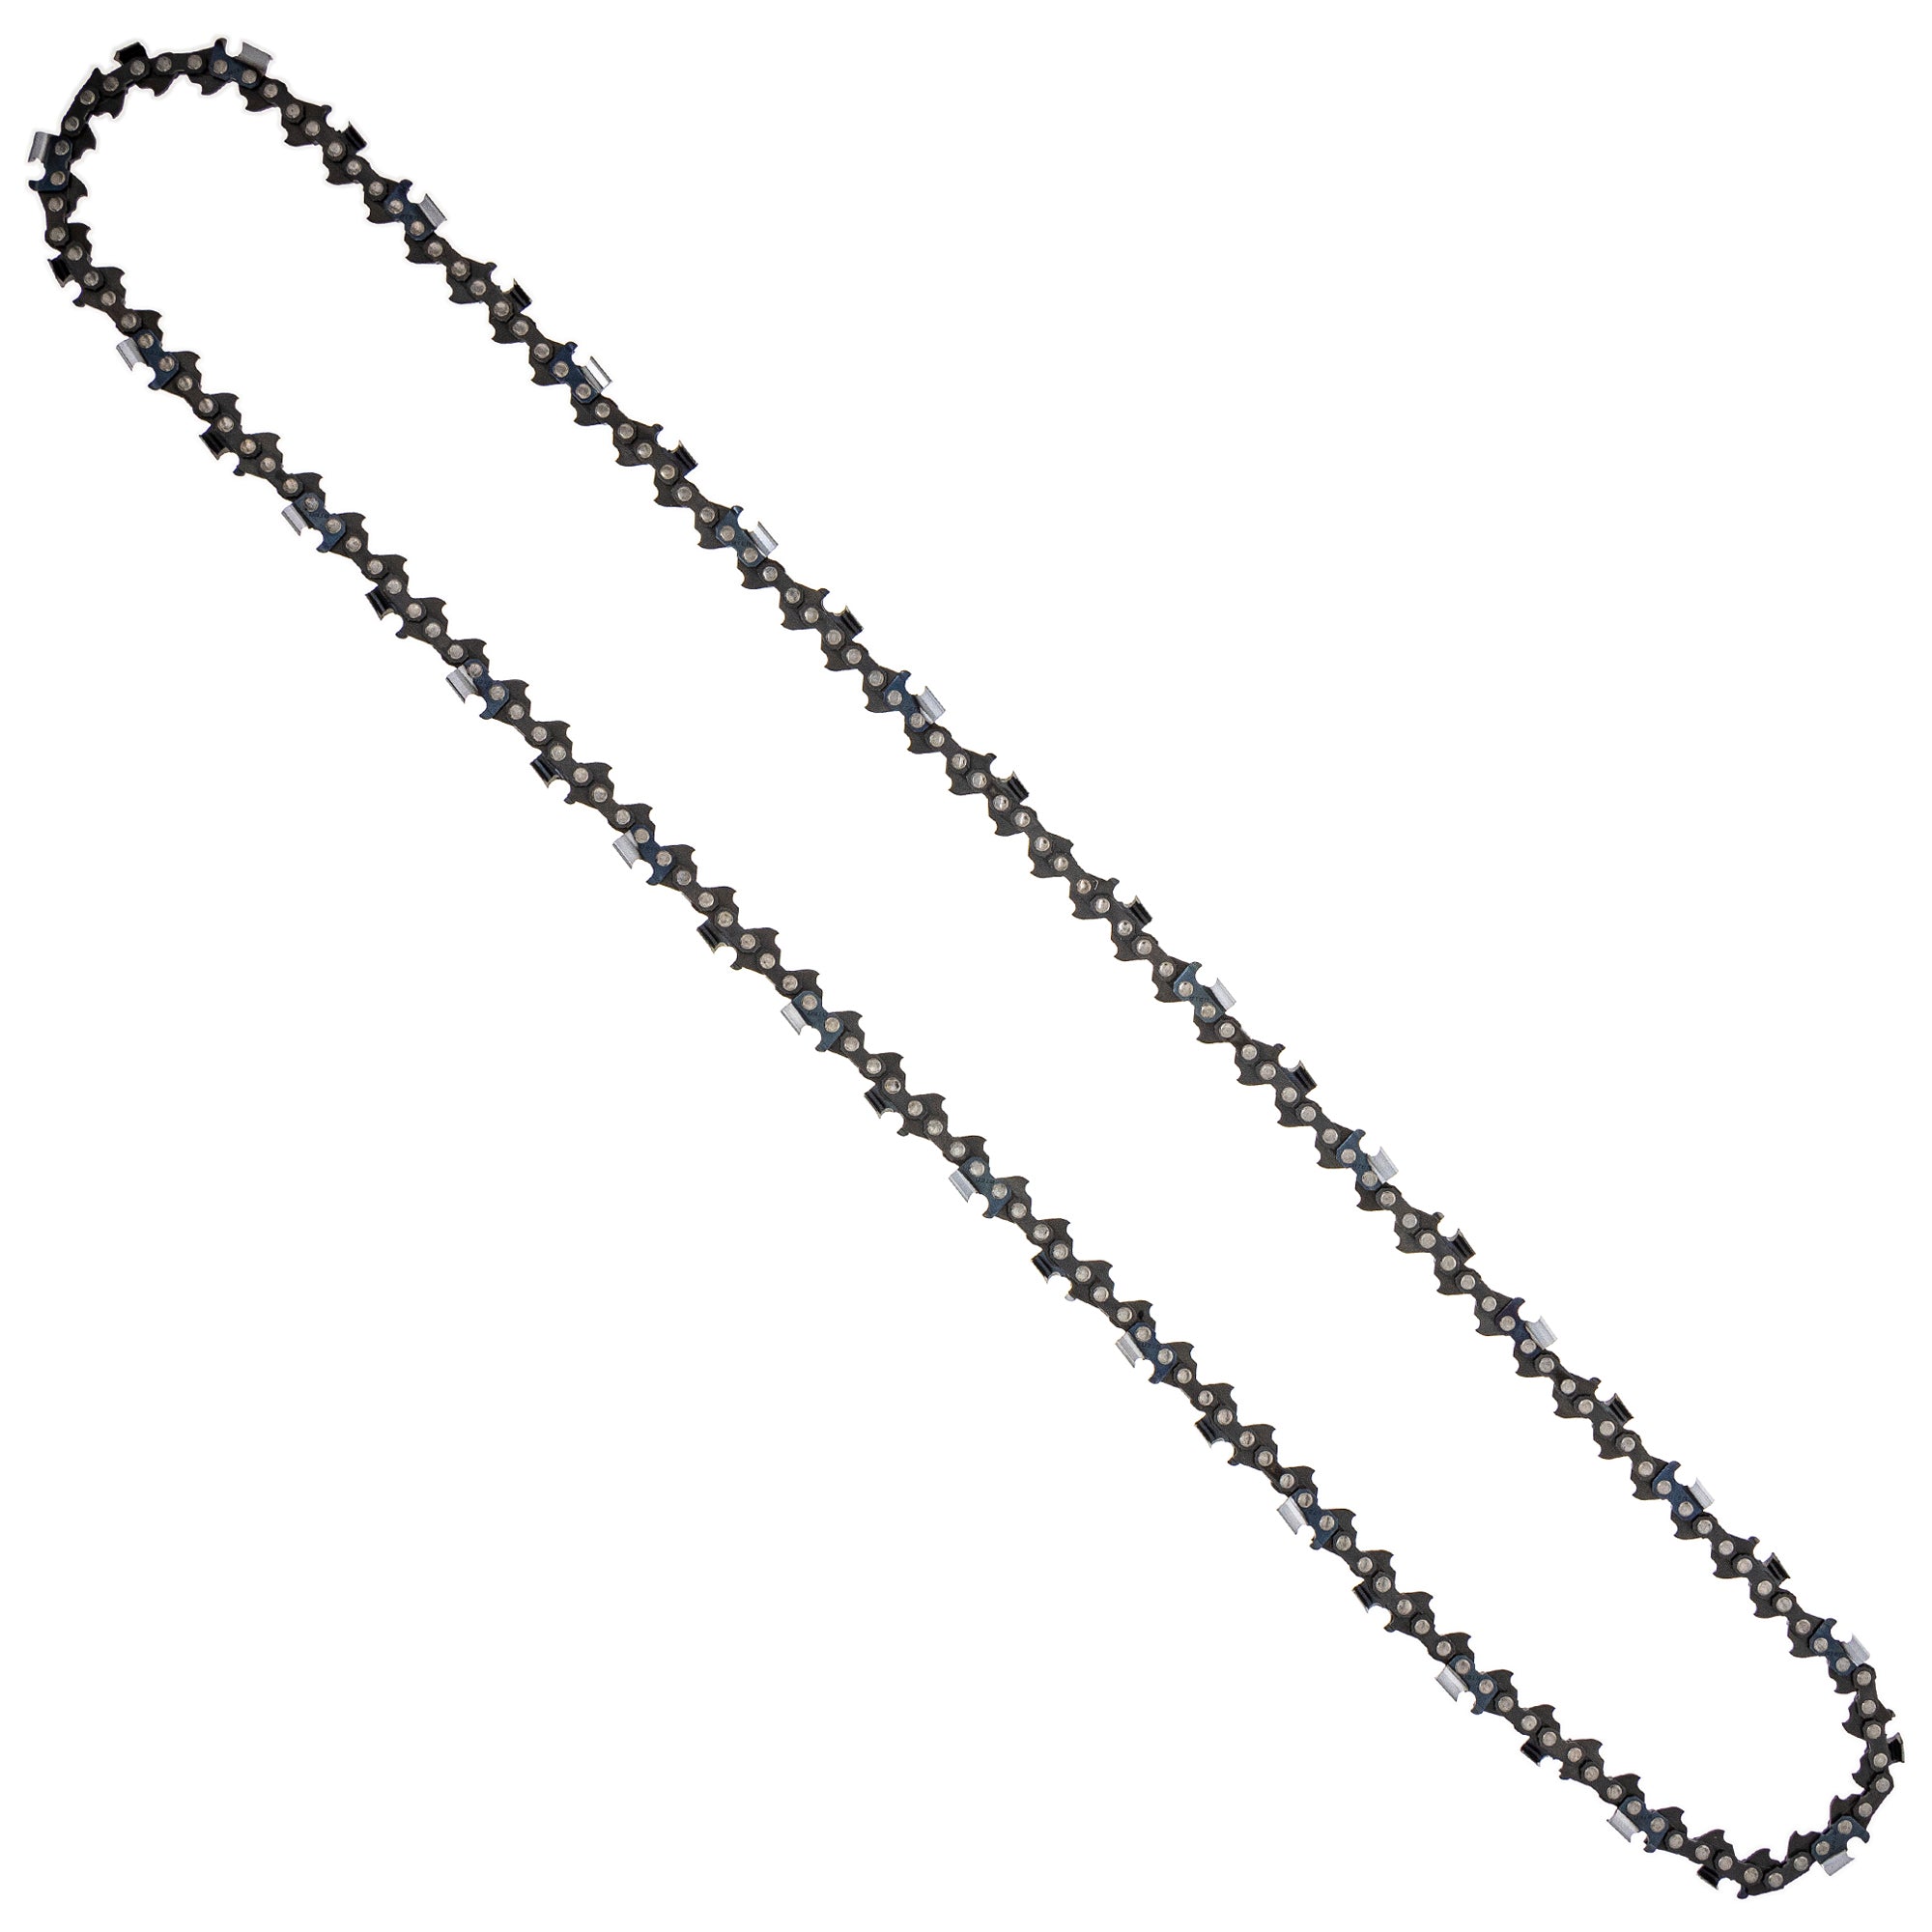 8TEN 810-CCC2352H Chain 2-Pack for zOTHER Oregon MS 066 064 056